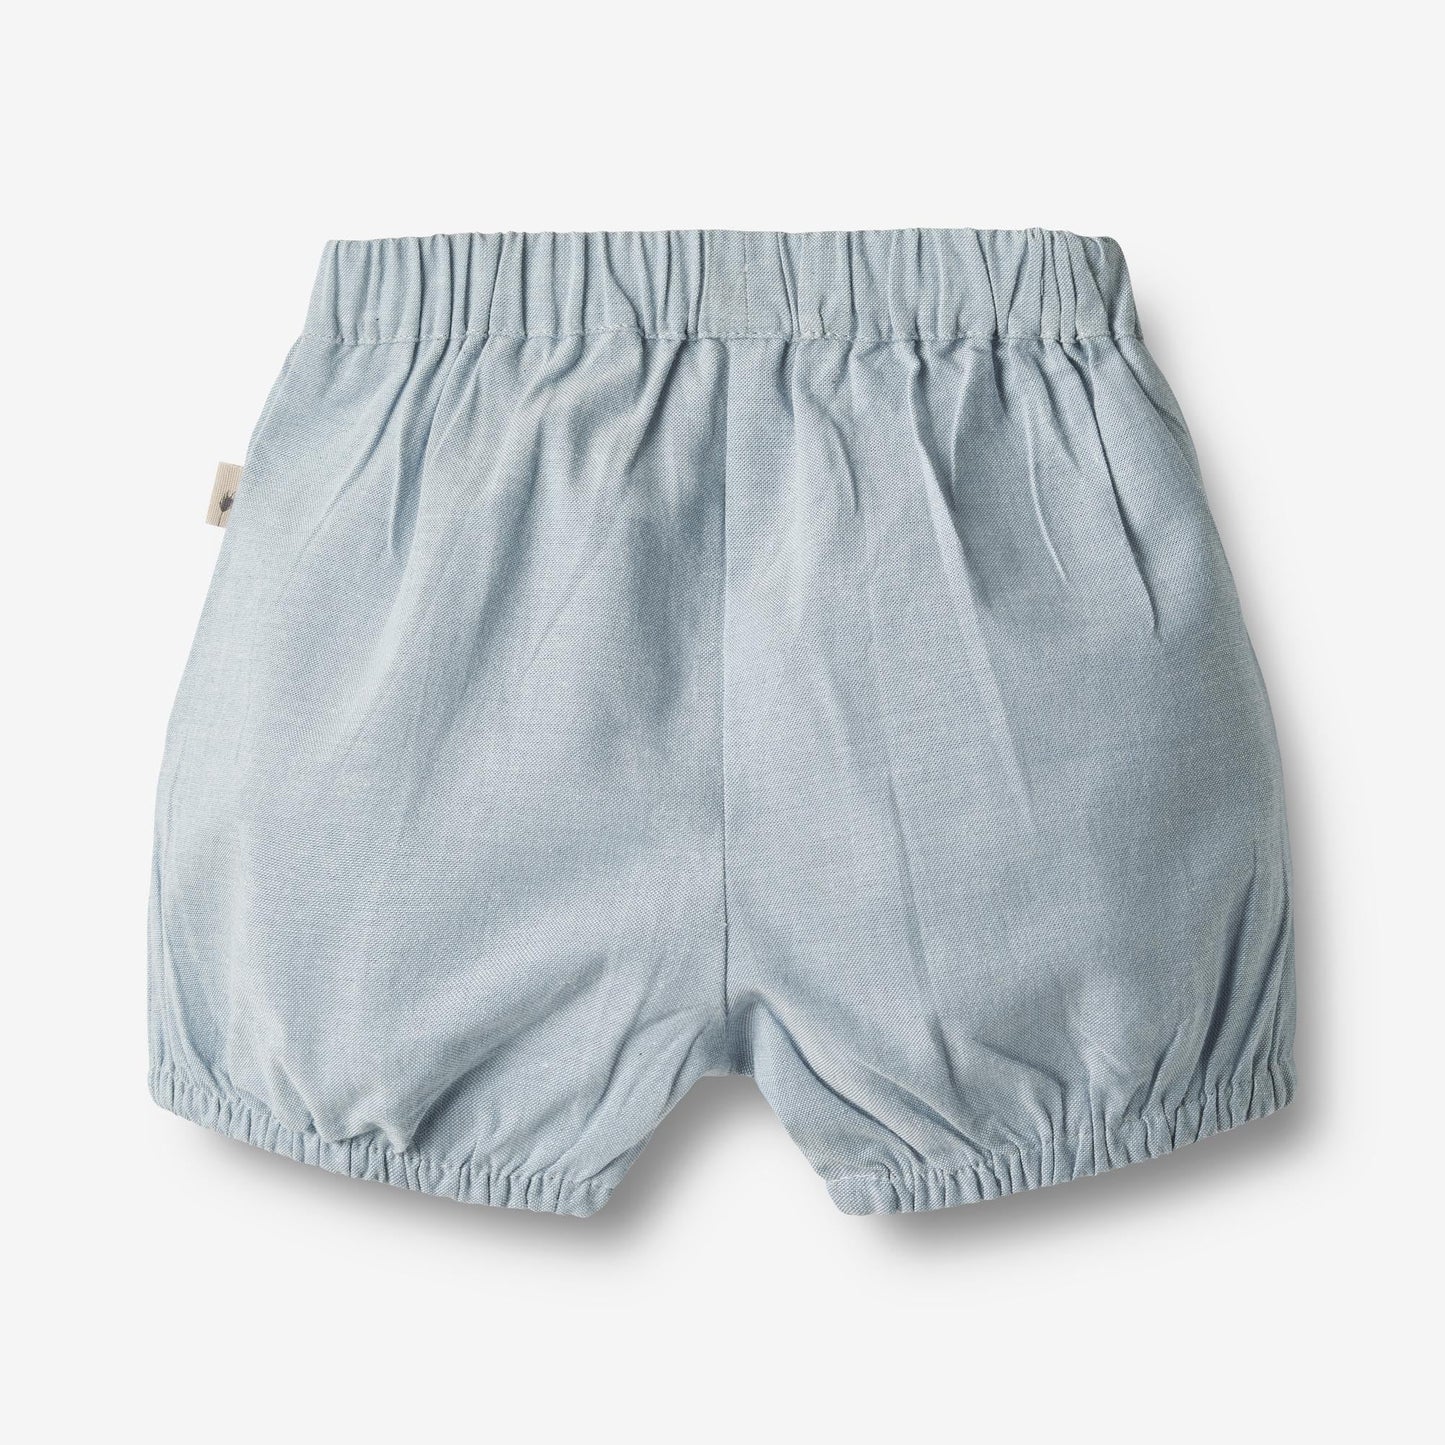 Wheat 'Olly' Baby Shorts - Blue Waves